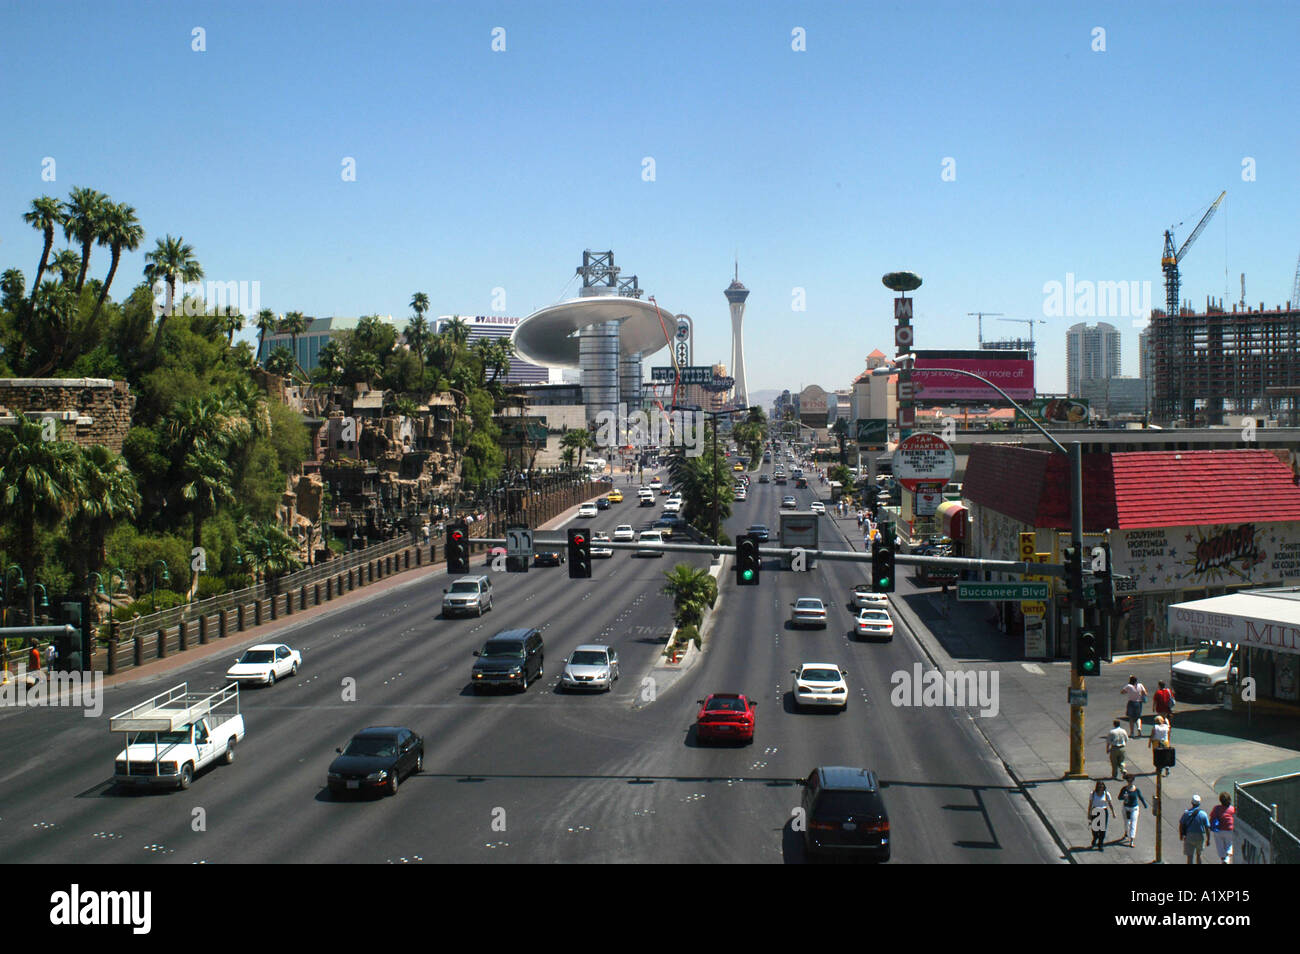 Las Vegas Boulevard also known as the strip Midtown at midday Stock Photo